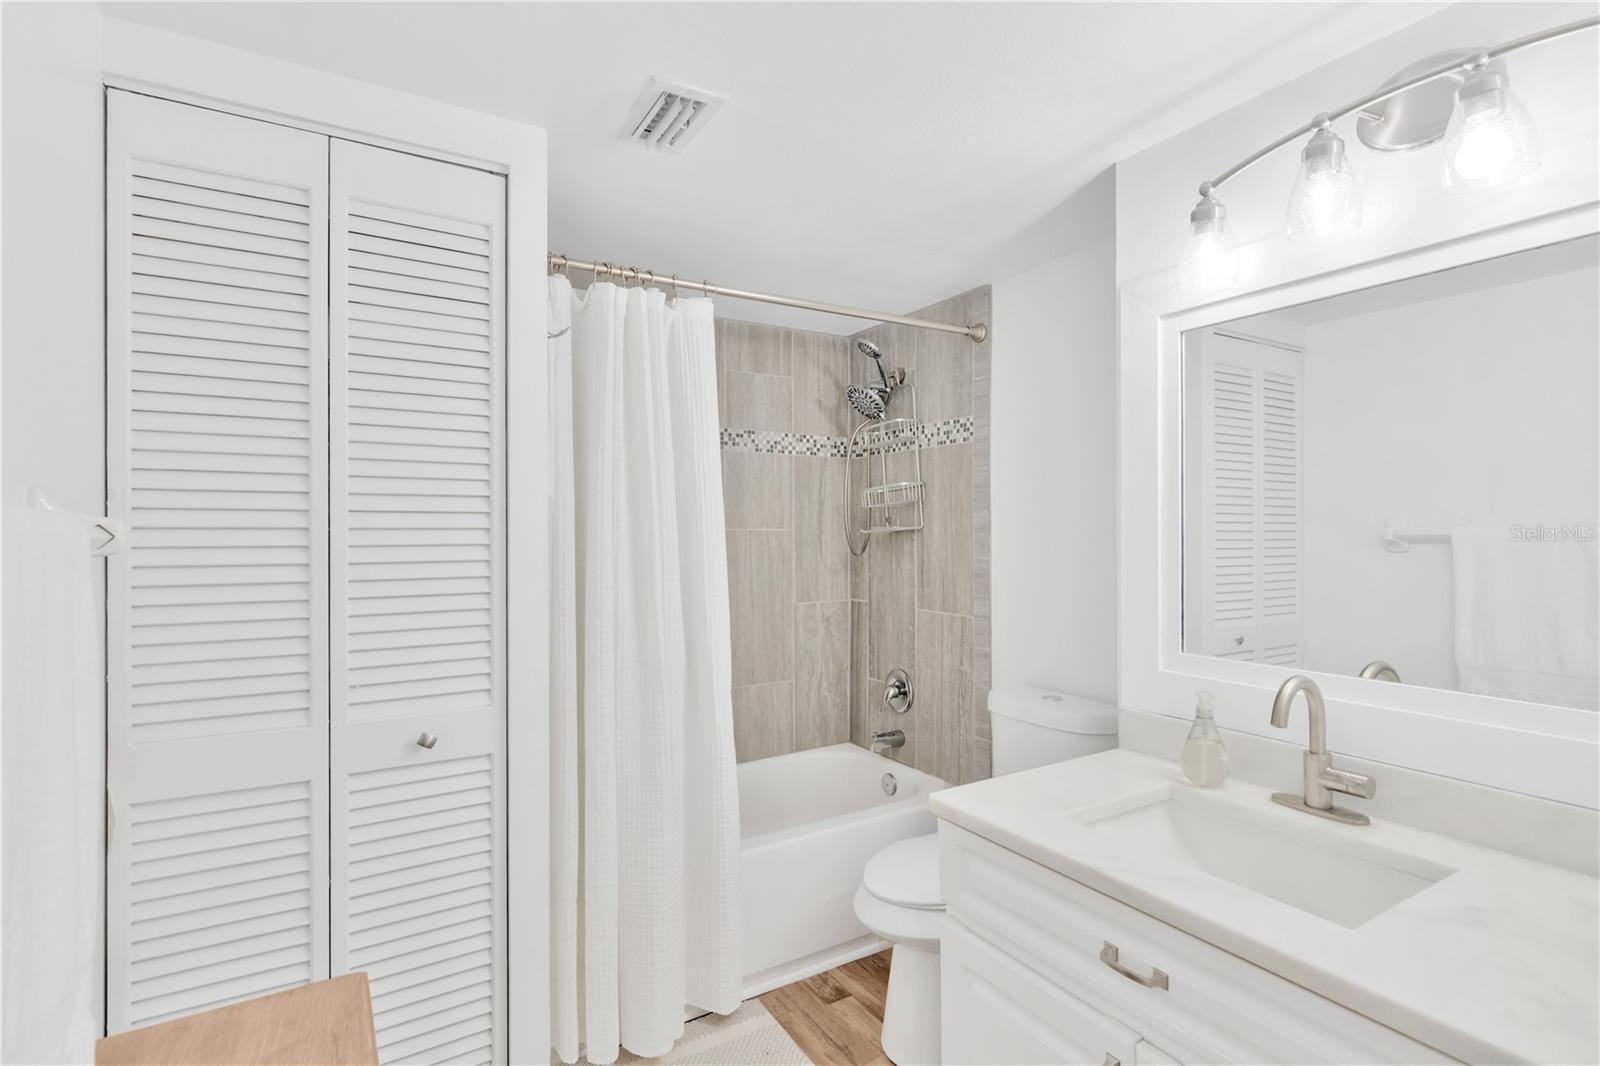 Equally as impressive is the Guest Bathroom with tile tub/shower combo & closet space.